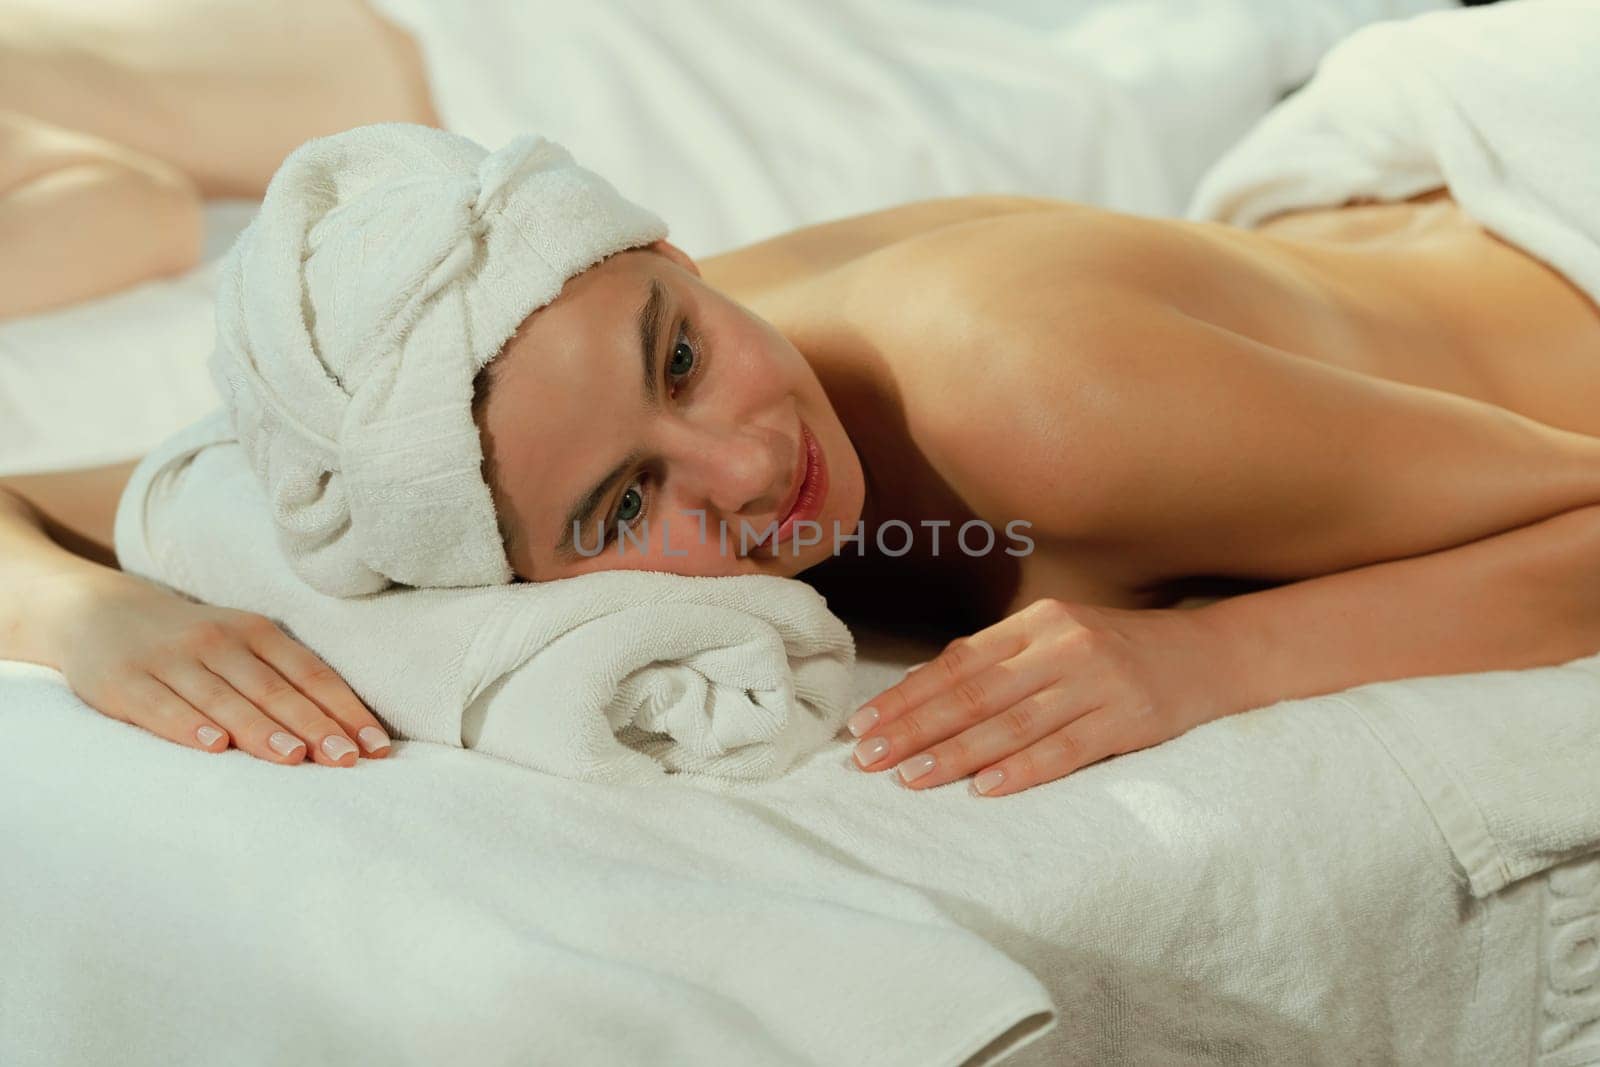 Beautiful young woman lies on a spa bed waiting for body massage. Relaxed and at peace concept. Pretty caucasian girl surrounded by gentle aroma of essential oils at spa salon. Close up. Tranquility.